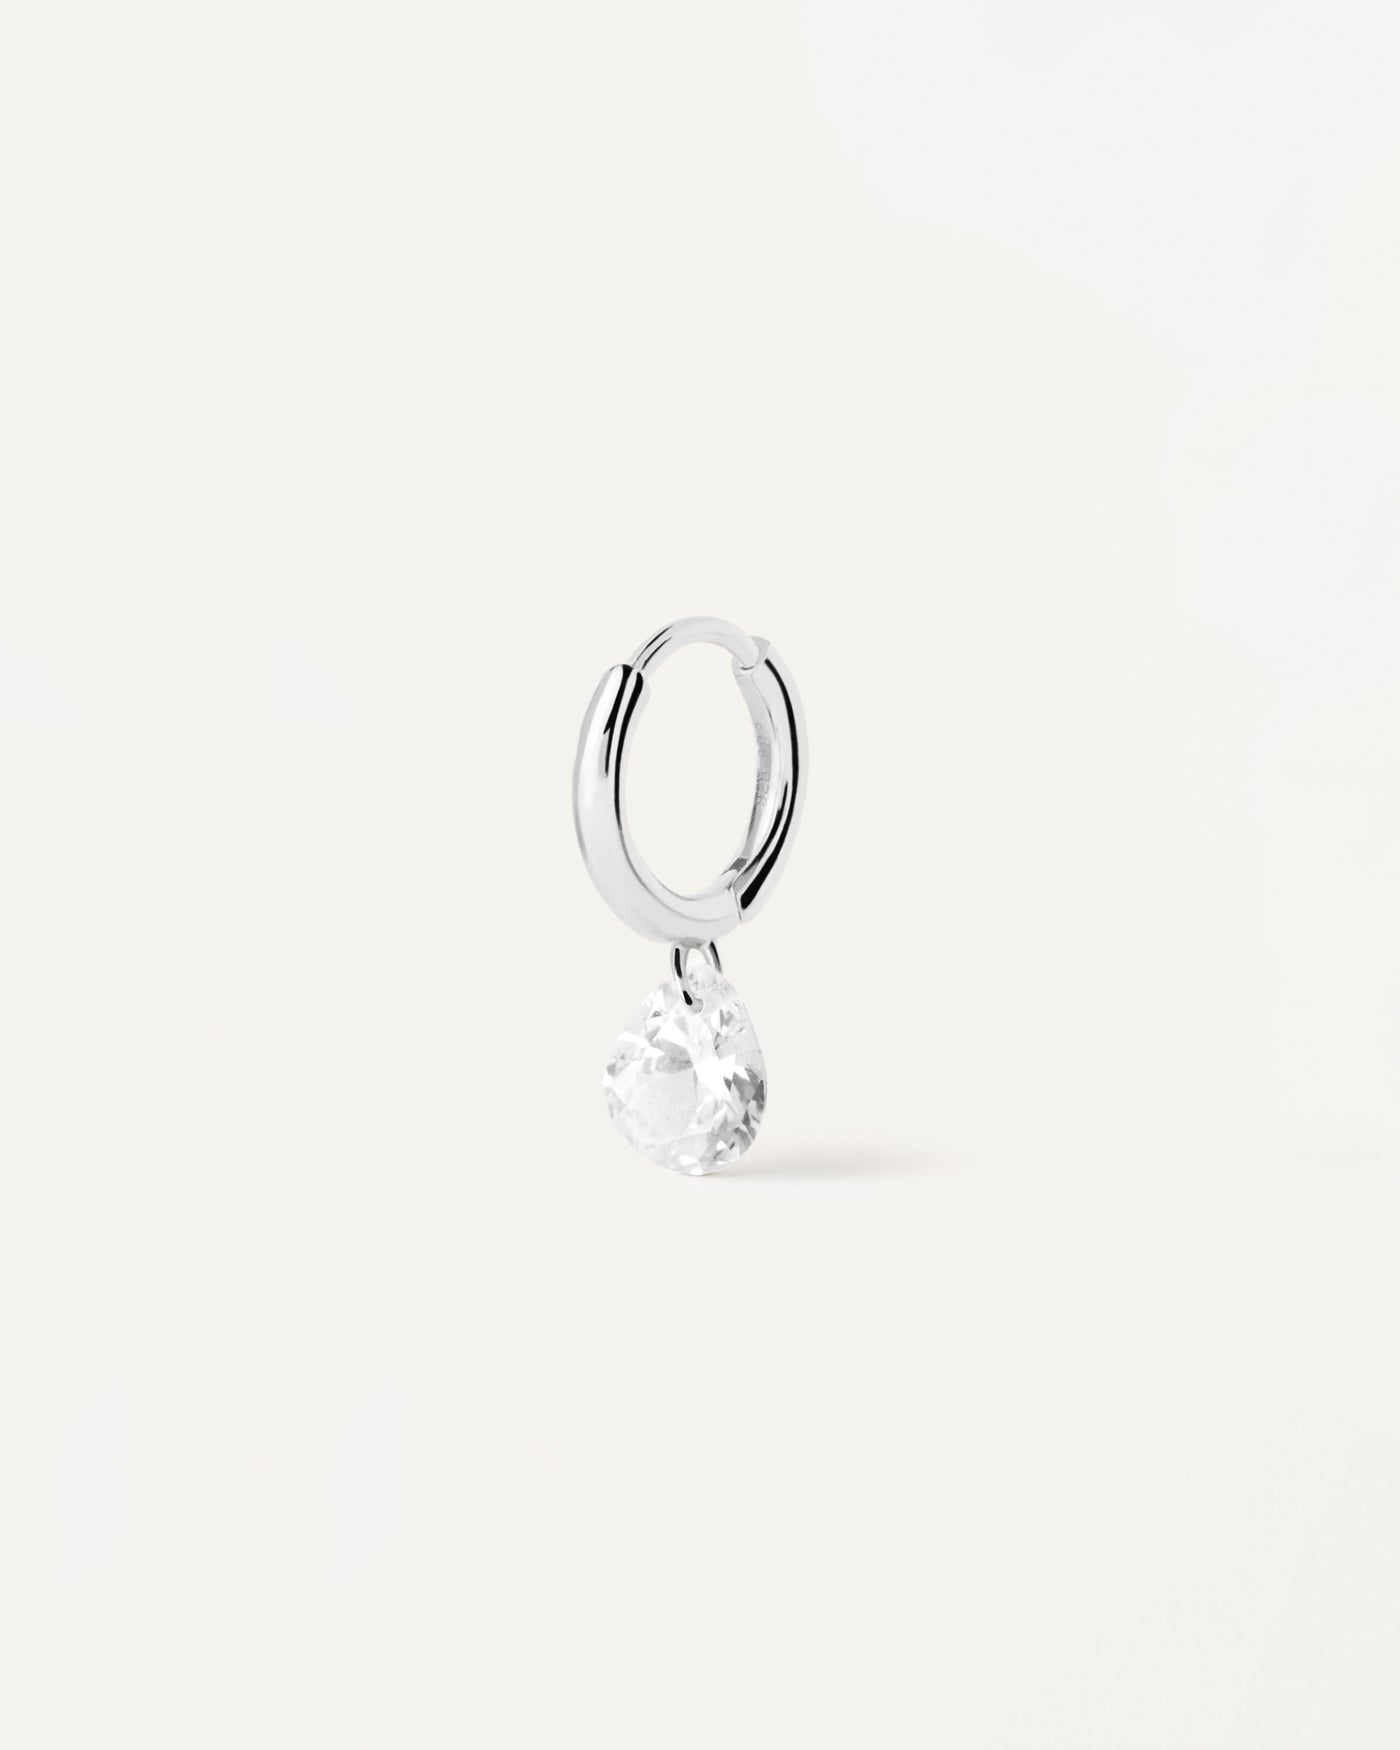 2023 Selection | Aqua silver single hoop Earring. Sterling silver ear piercing with white zirconia drop pendant. Get the latest arrival from PDPAOLA. Place your order safely and get this Best Seller. Free Shipping.